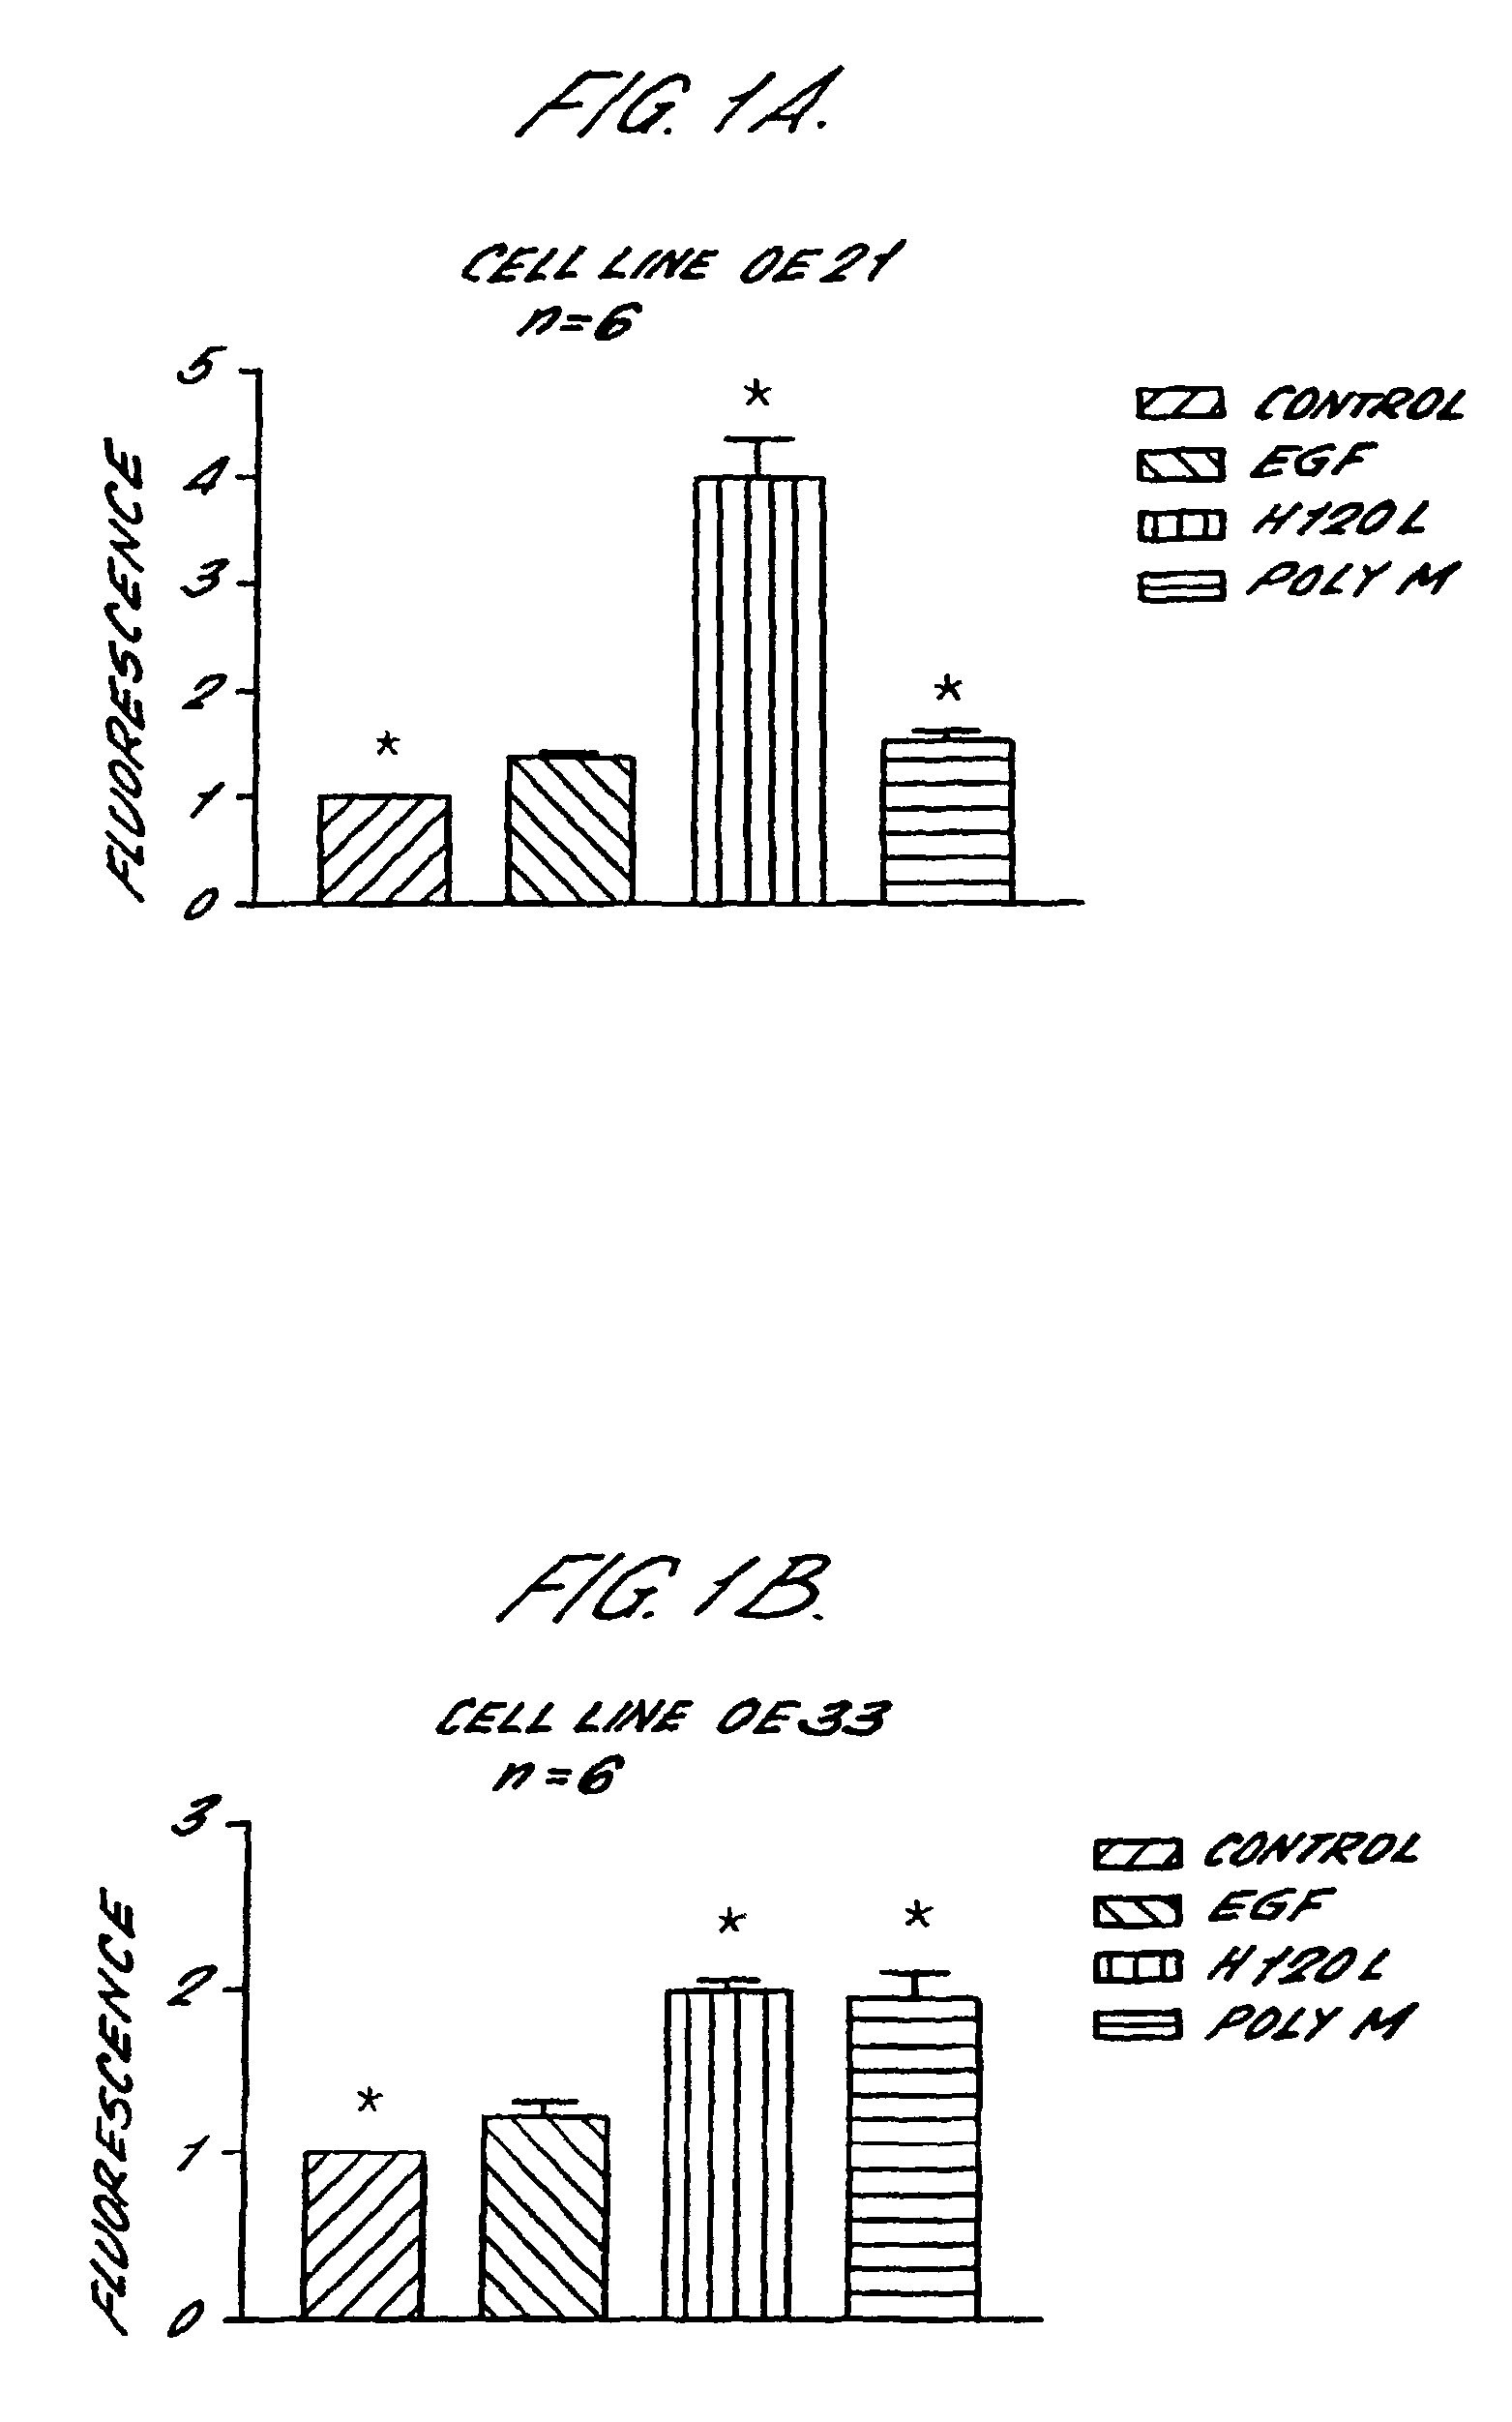 Pharmaceutical compositions including alginates and methods of preparing and using same